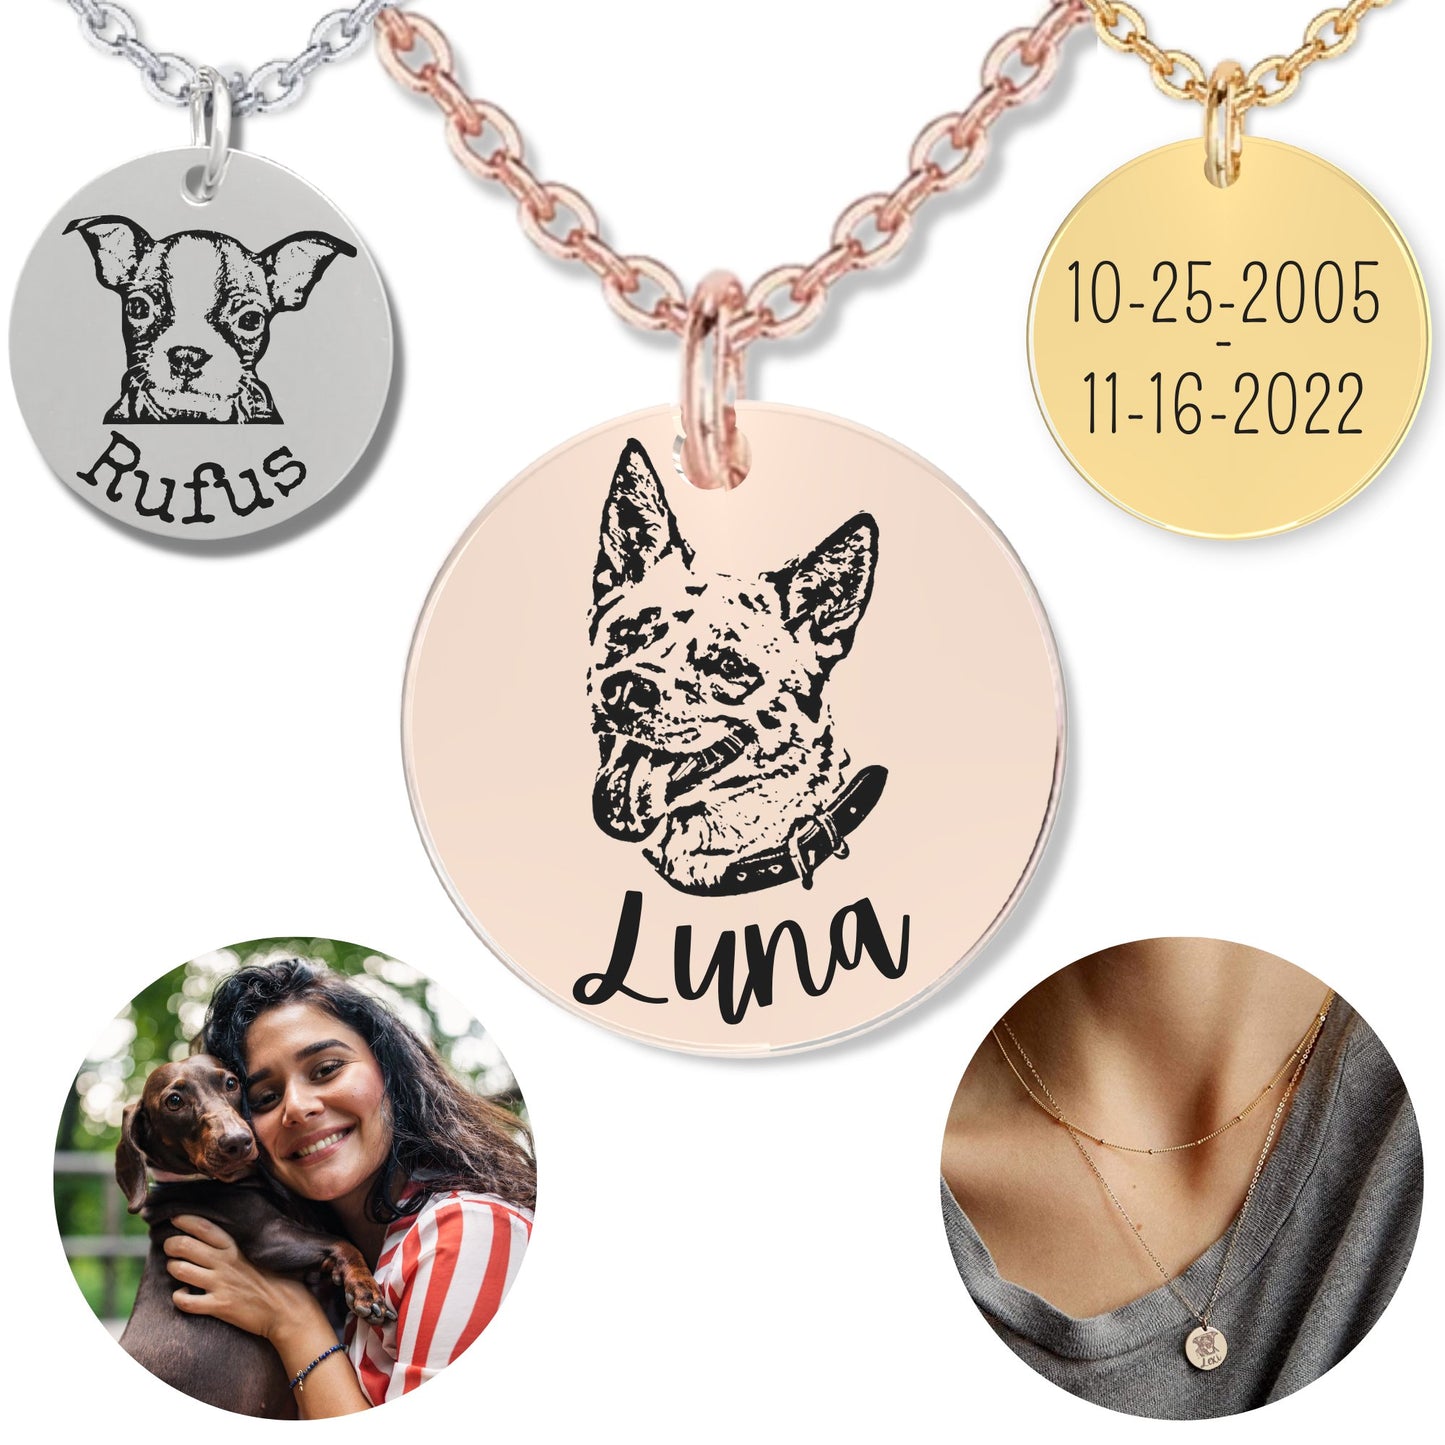 Necklace - Engraved Necklace with Engraved Pet's Face (Gold)